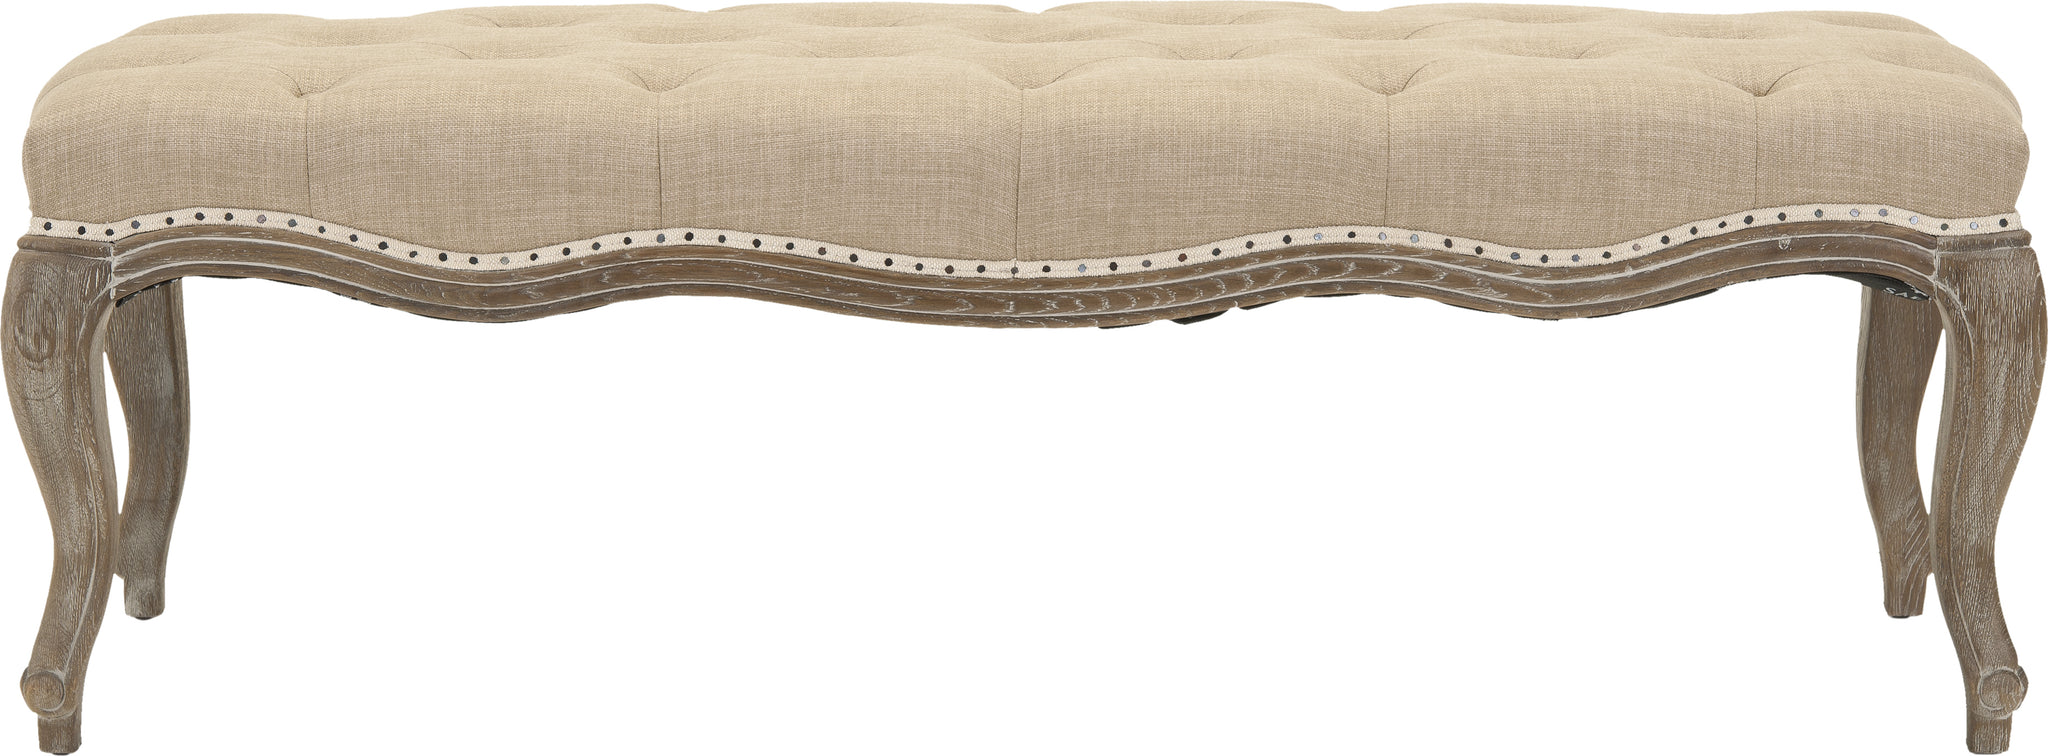 Safavieh Ramsey Bench With Flat Black Nail Heads Wheat Beige and Pickled Oak Finish Furniture main image